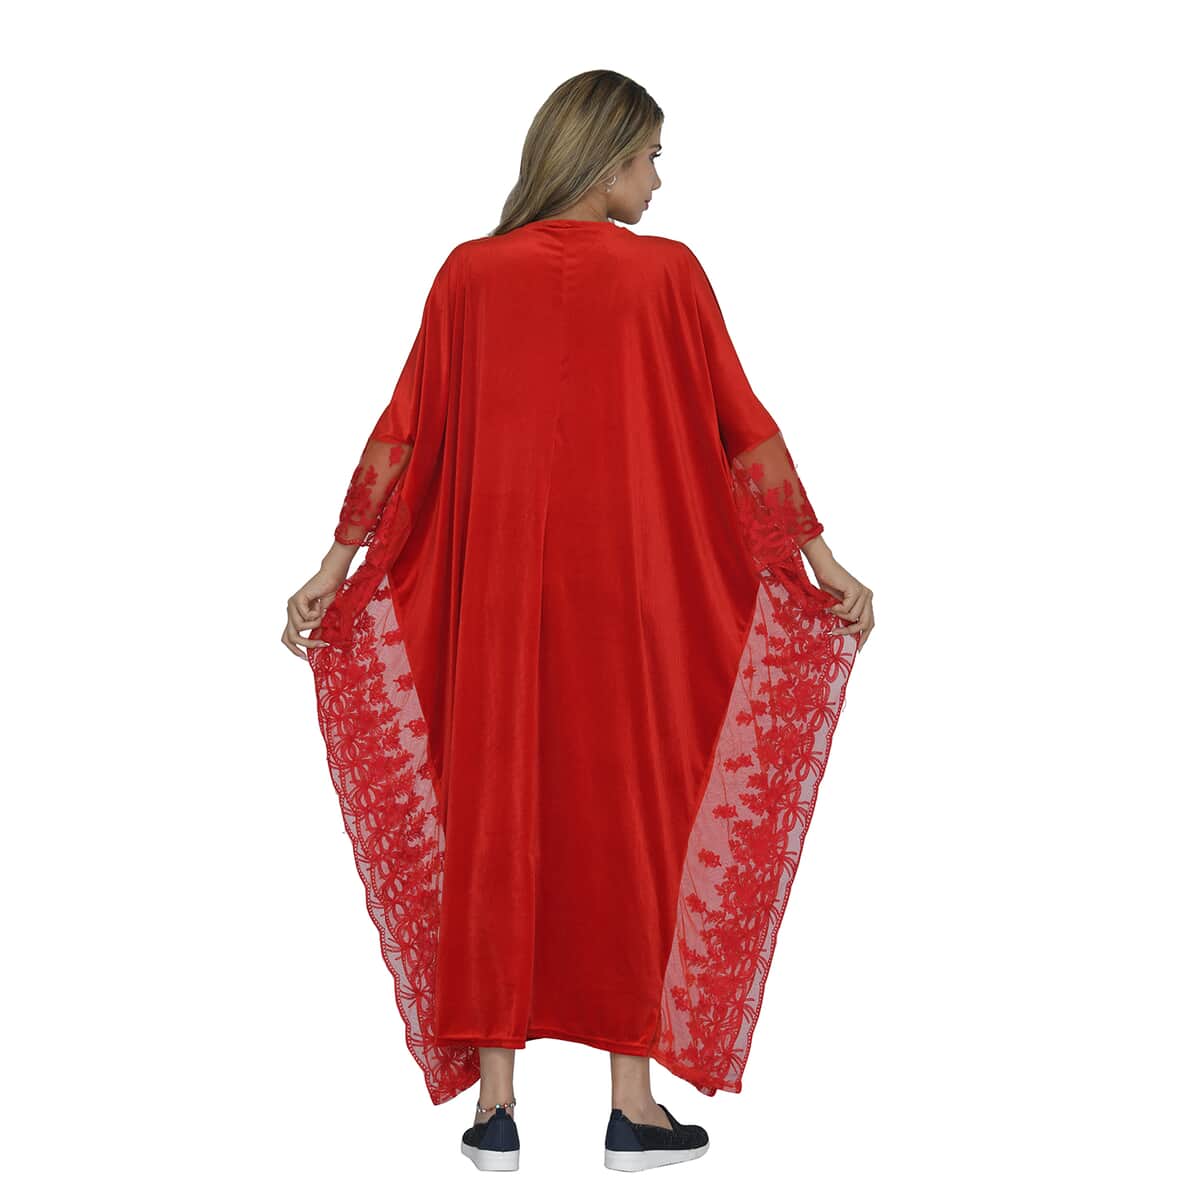 Tamsy Black Label - Lux Stretch Velvet Kaftan with Lace in Red - One Size Fits Most image number 1